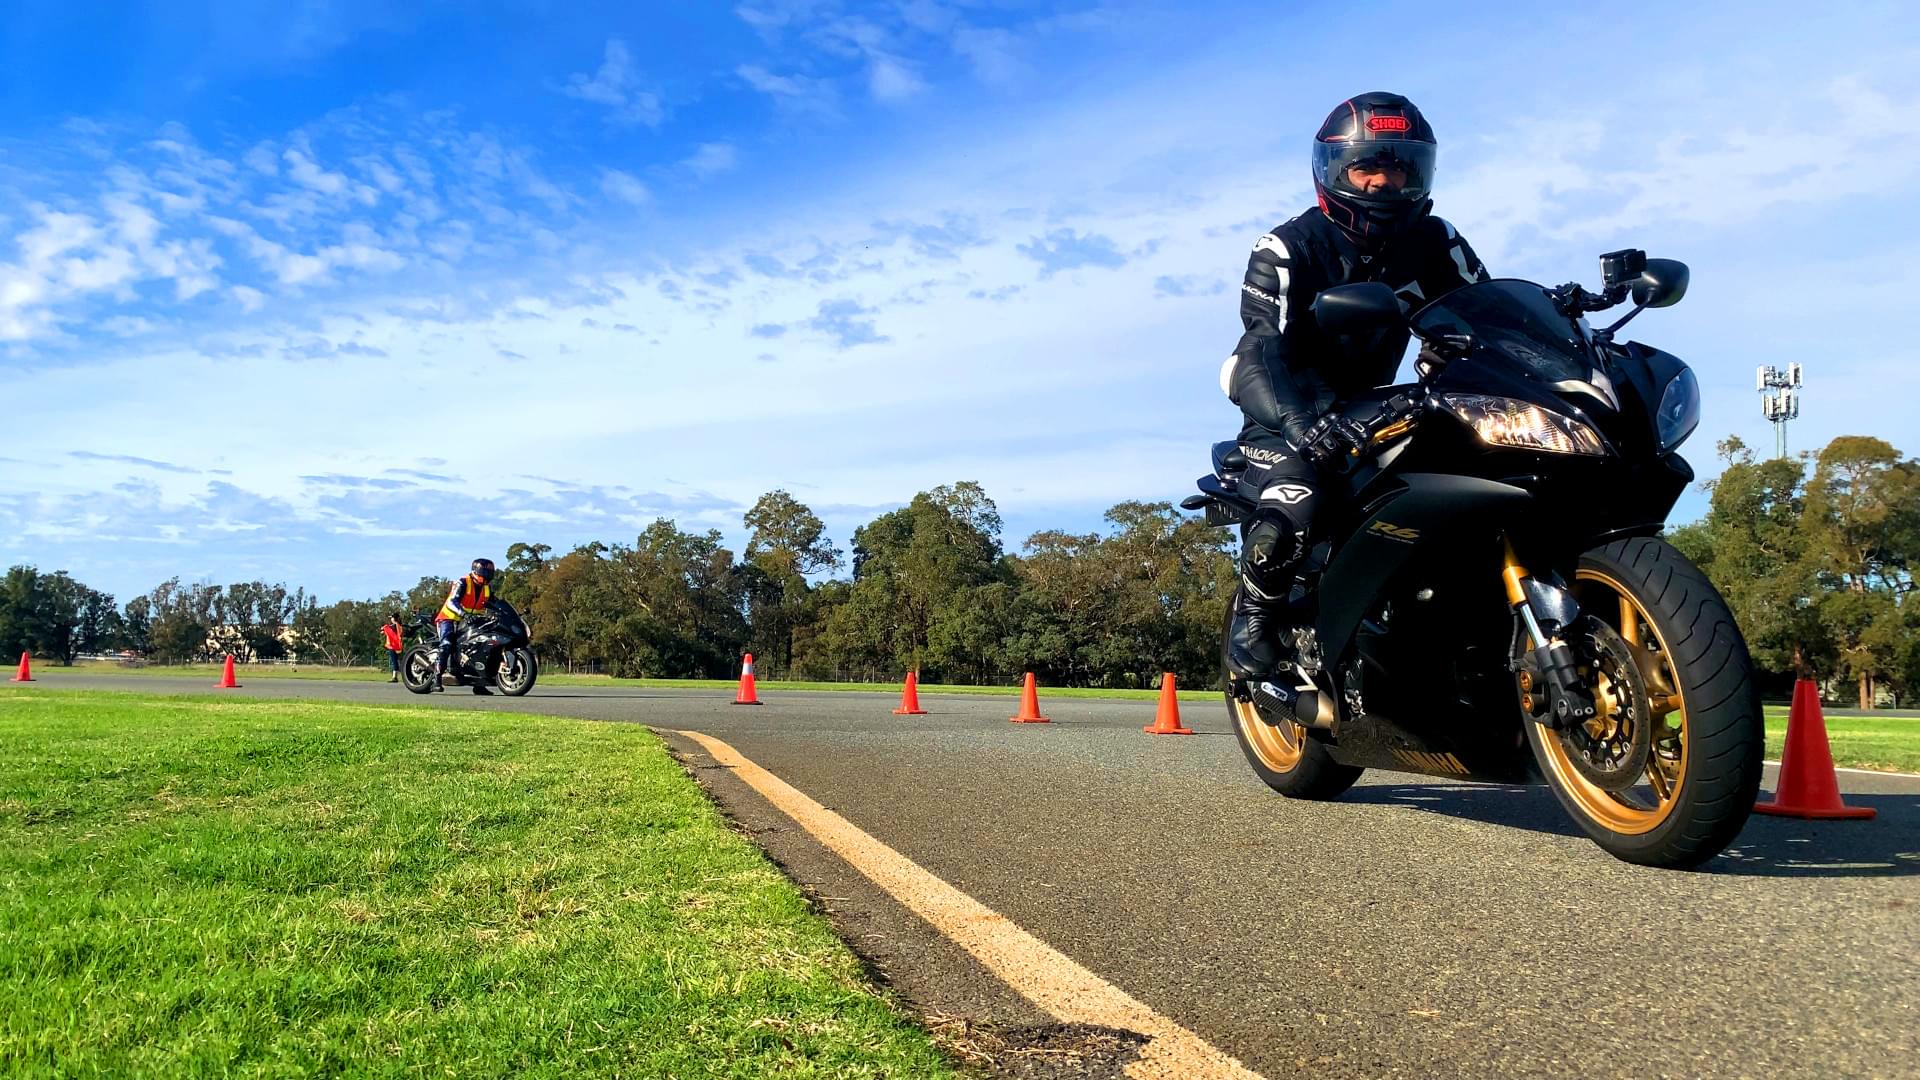 Yamaha R6 at one of our Performance Rider Training Events